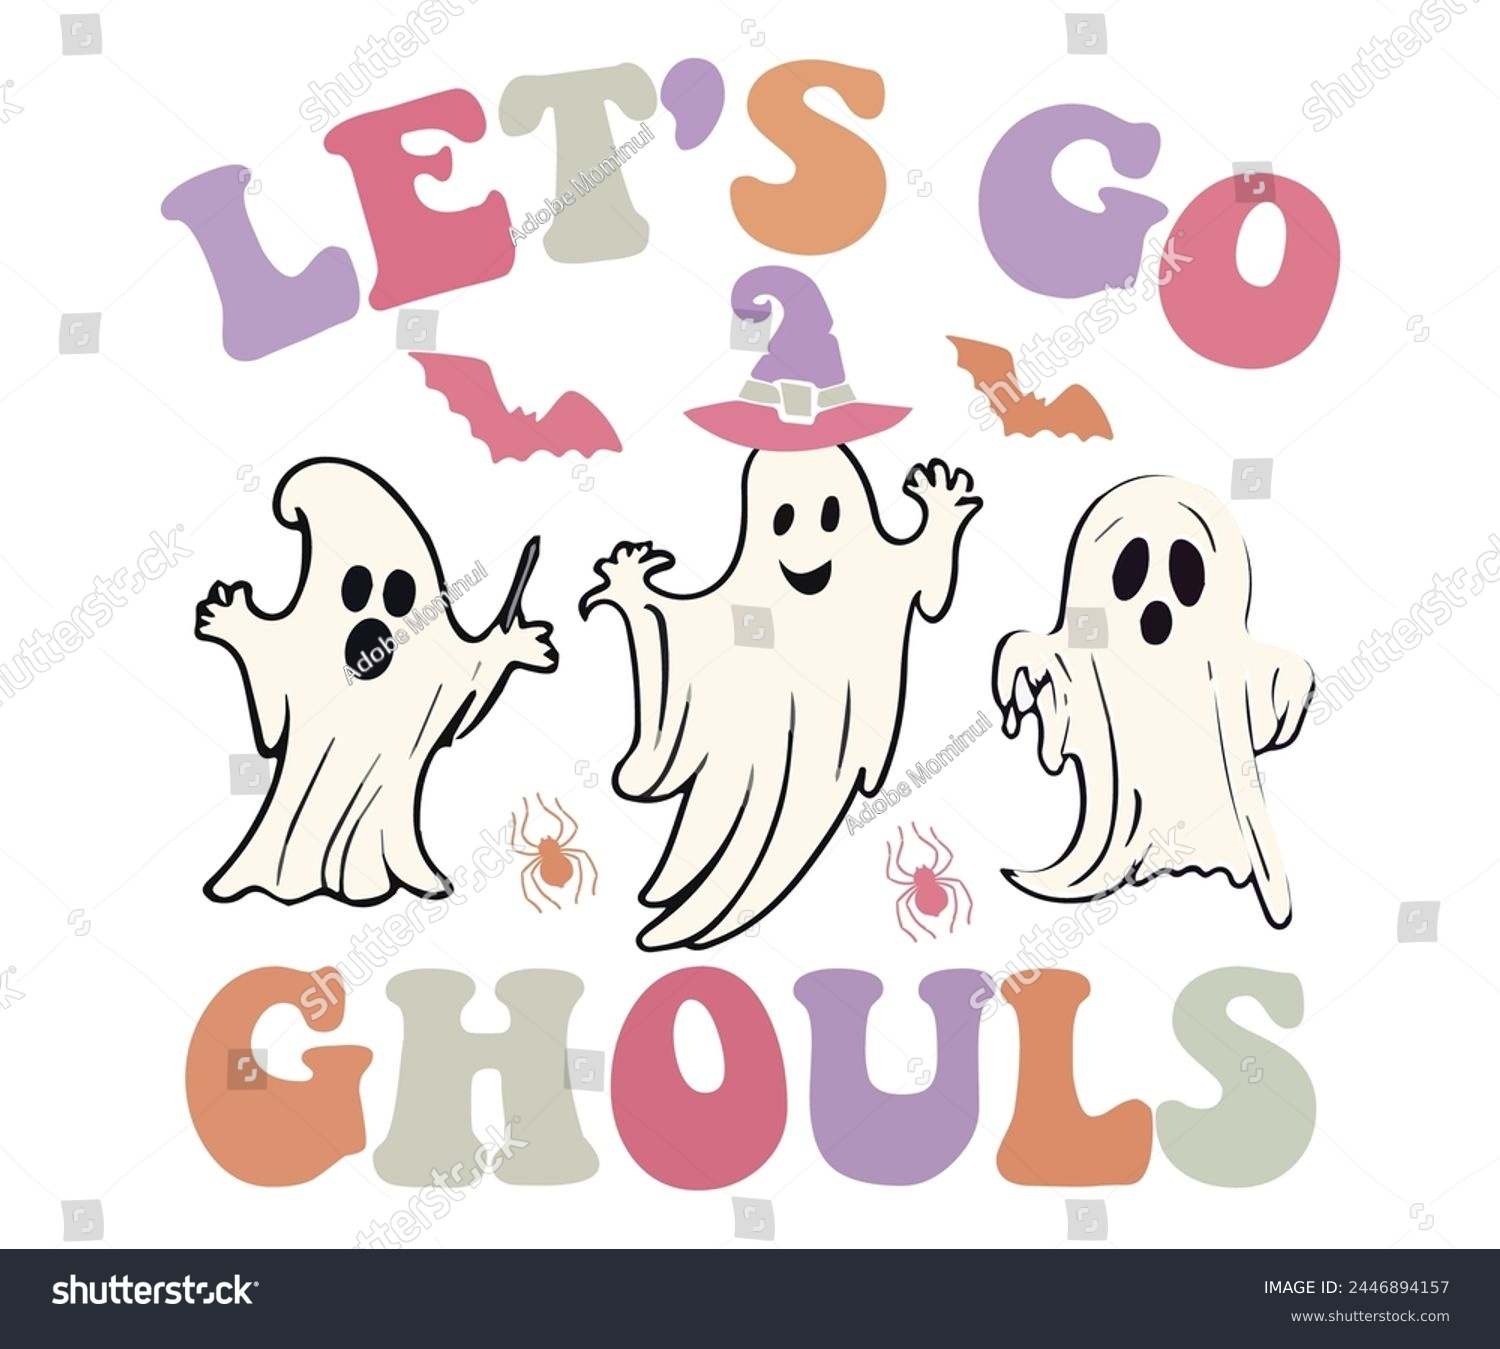 SVG of Let's Go Ghouls Retro Svg,Halloween Svg,Typography,Halloween Quotes,Witches Svg,Halloween Party,Halloween Costume,Halloween Gift,Funny Halloween,Spooky Svg,Funny T shirt,Ghost Svg,Cut file svg